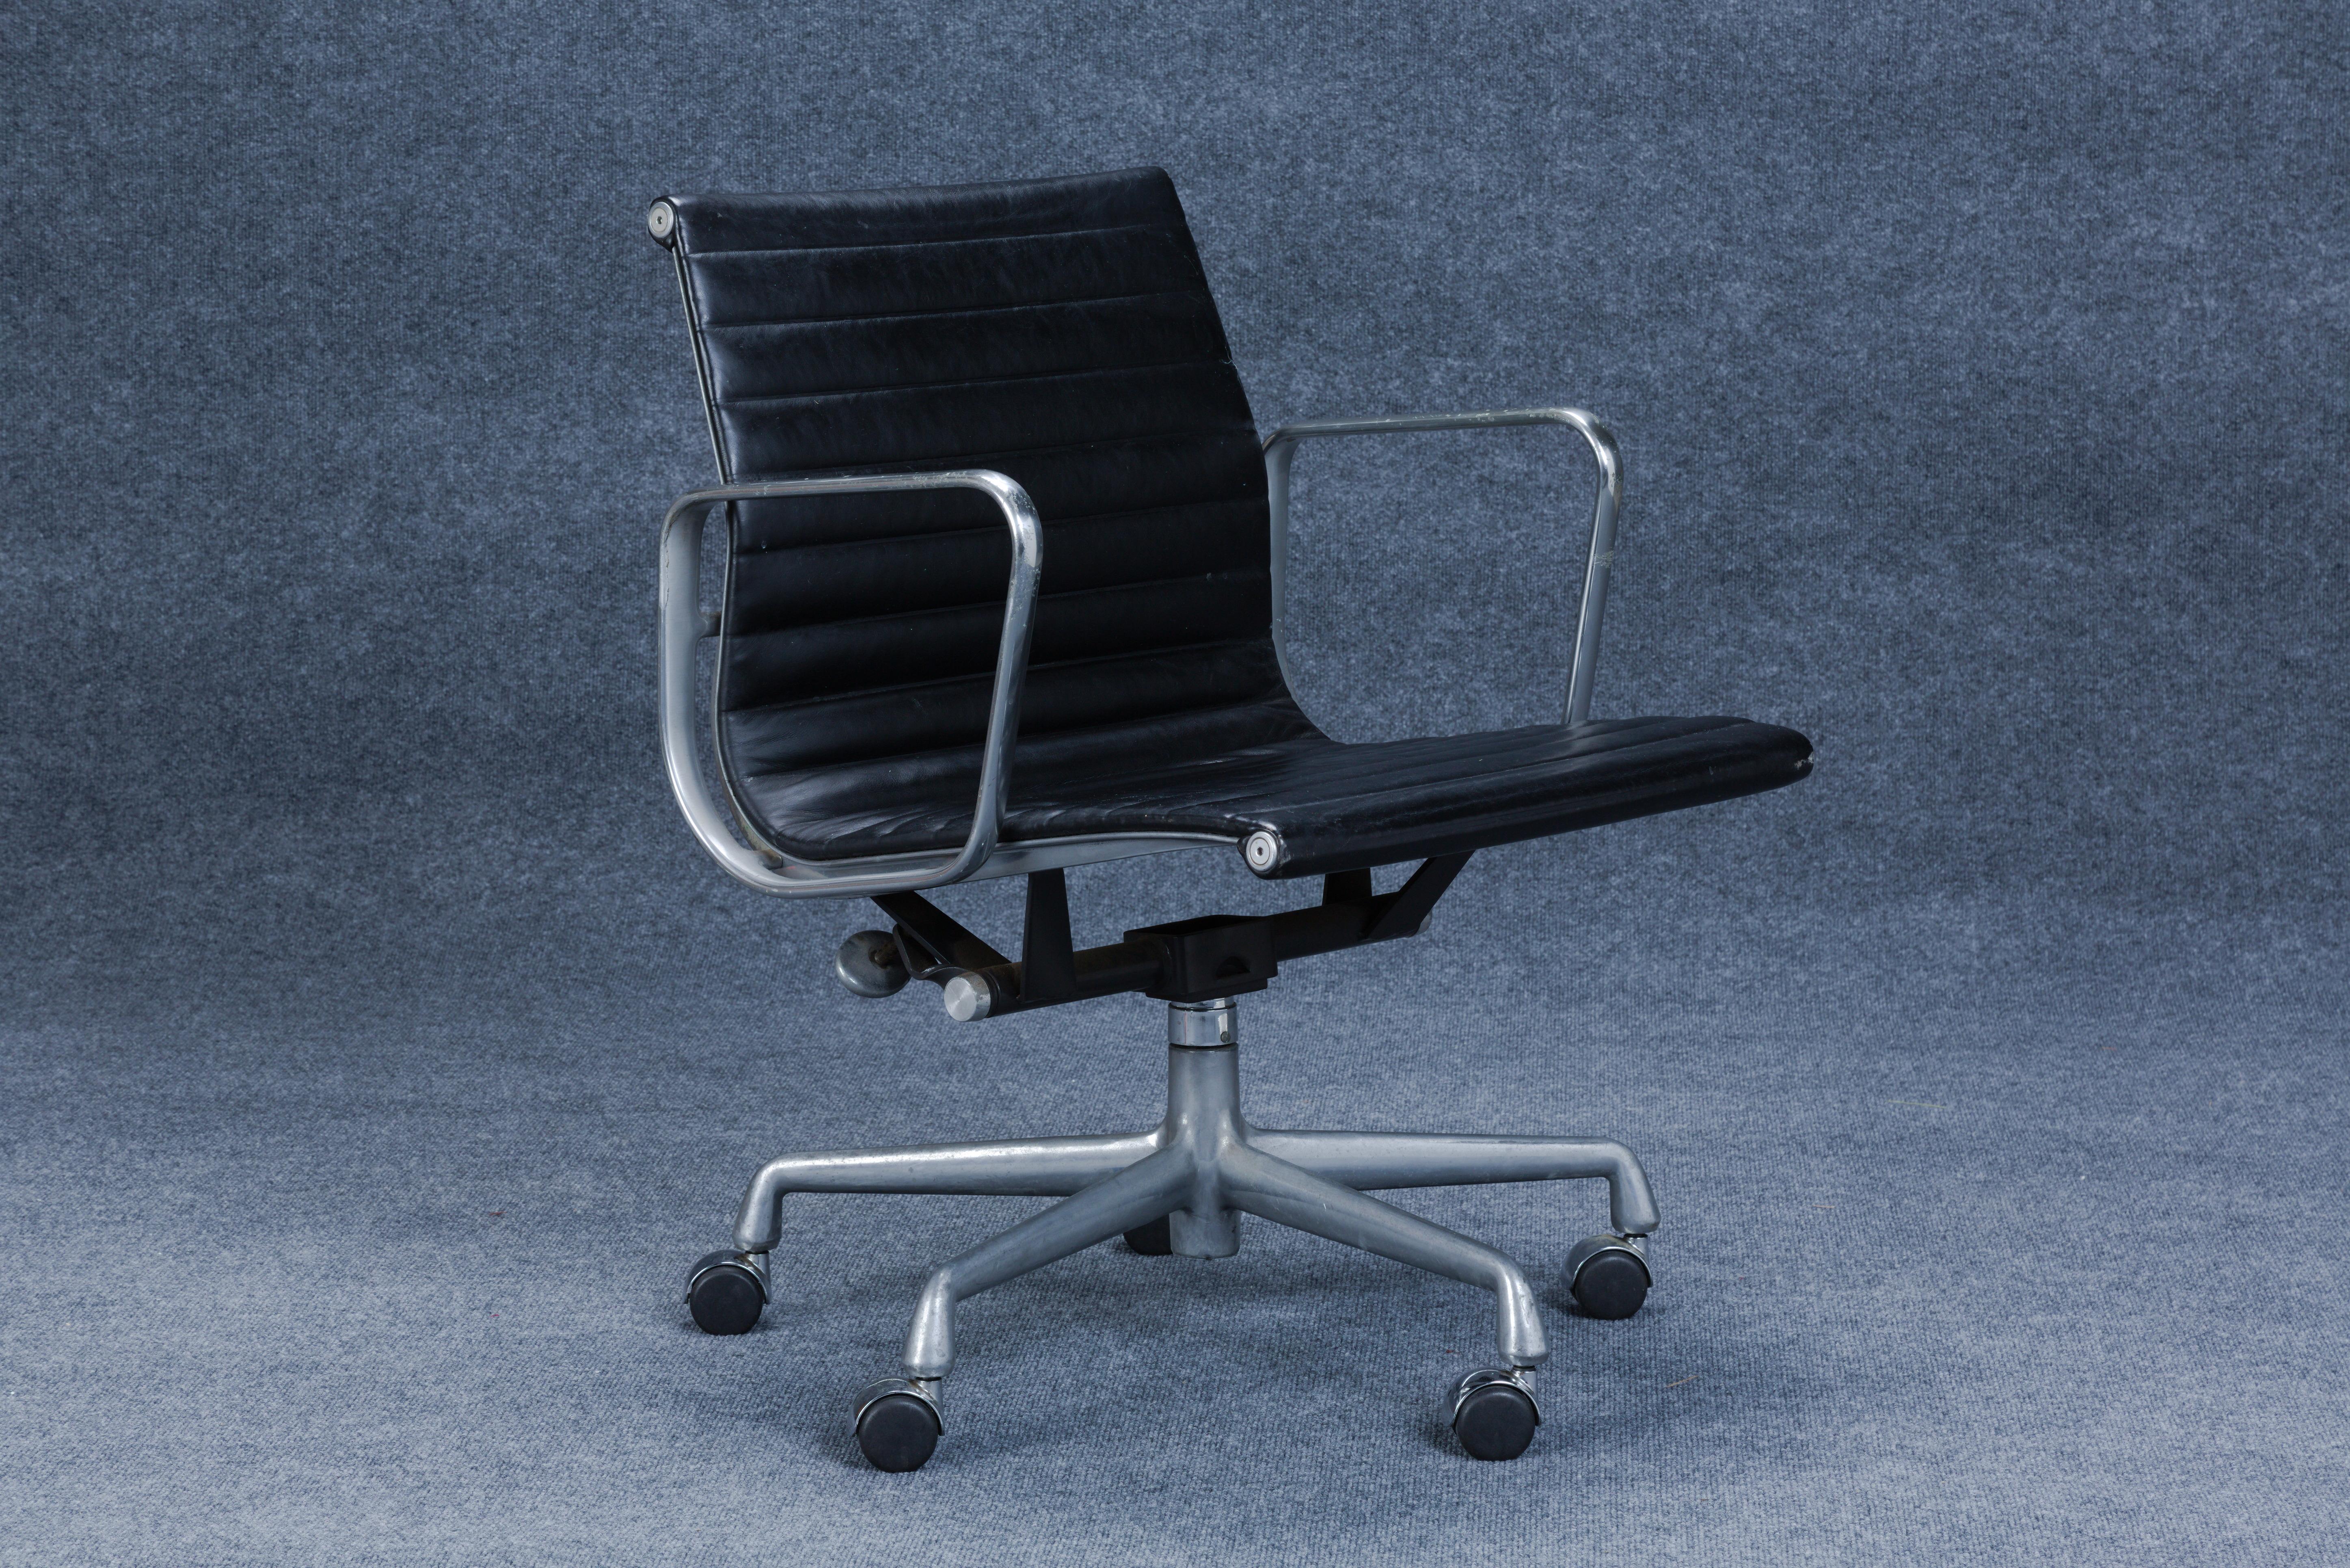 Mid-Century Modern Herman Miller Aluminum Group Management Chair by Charles Eames, c. 1965